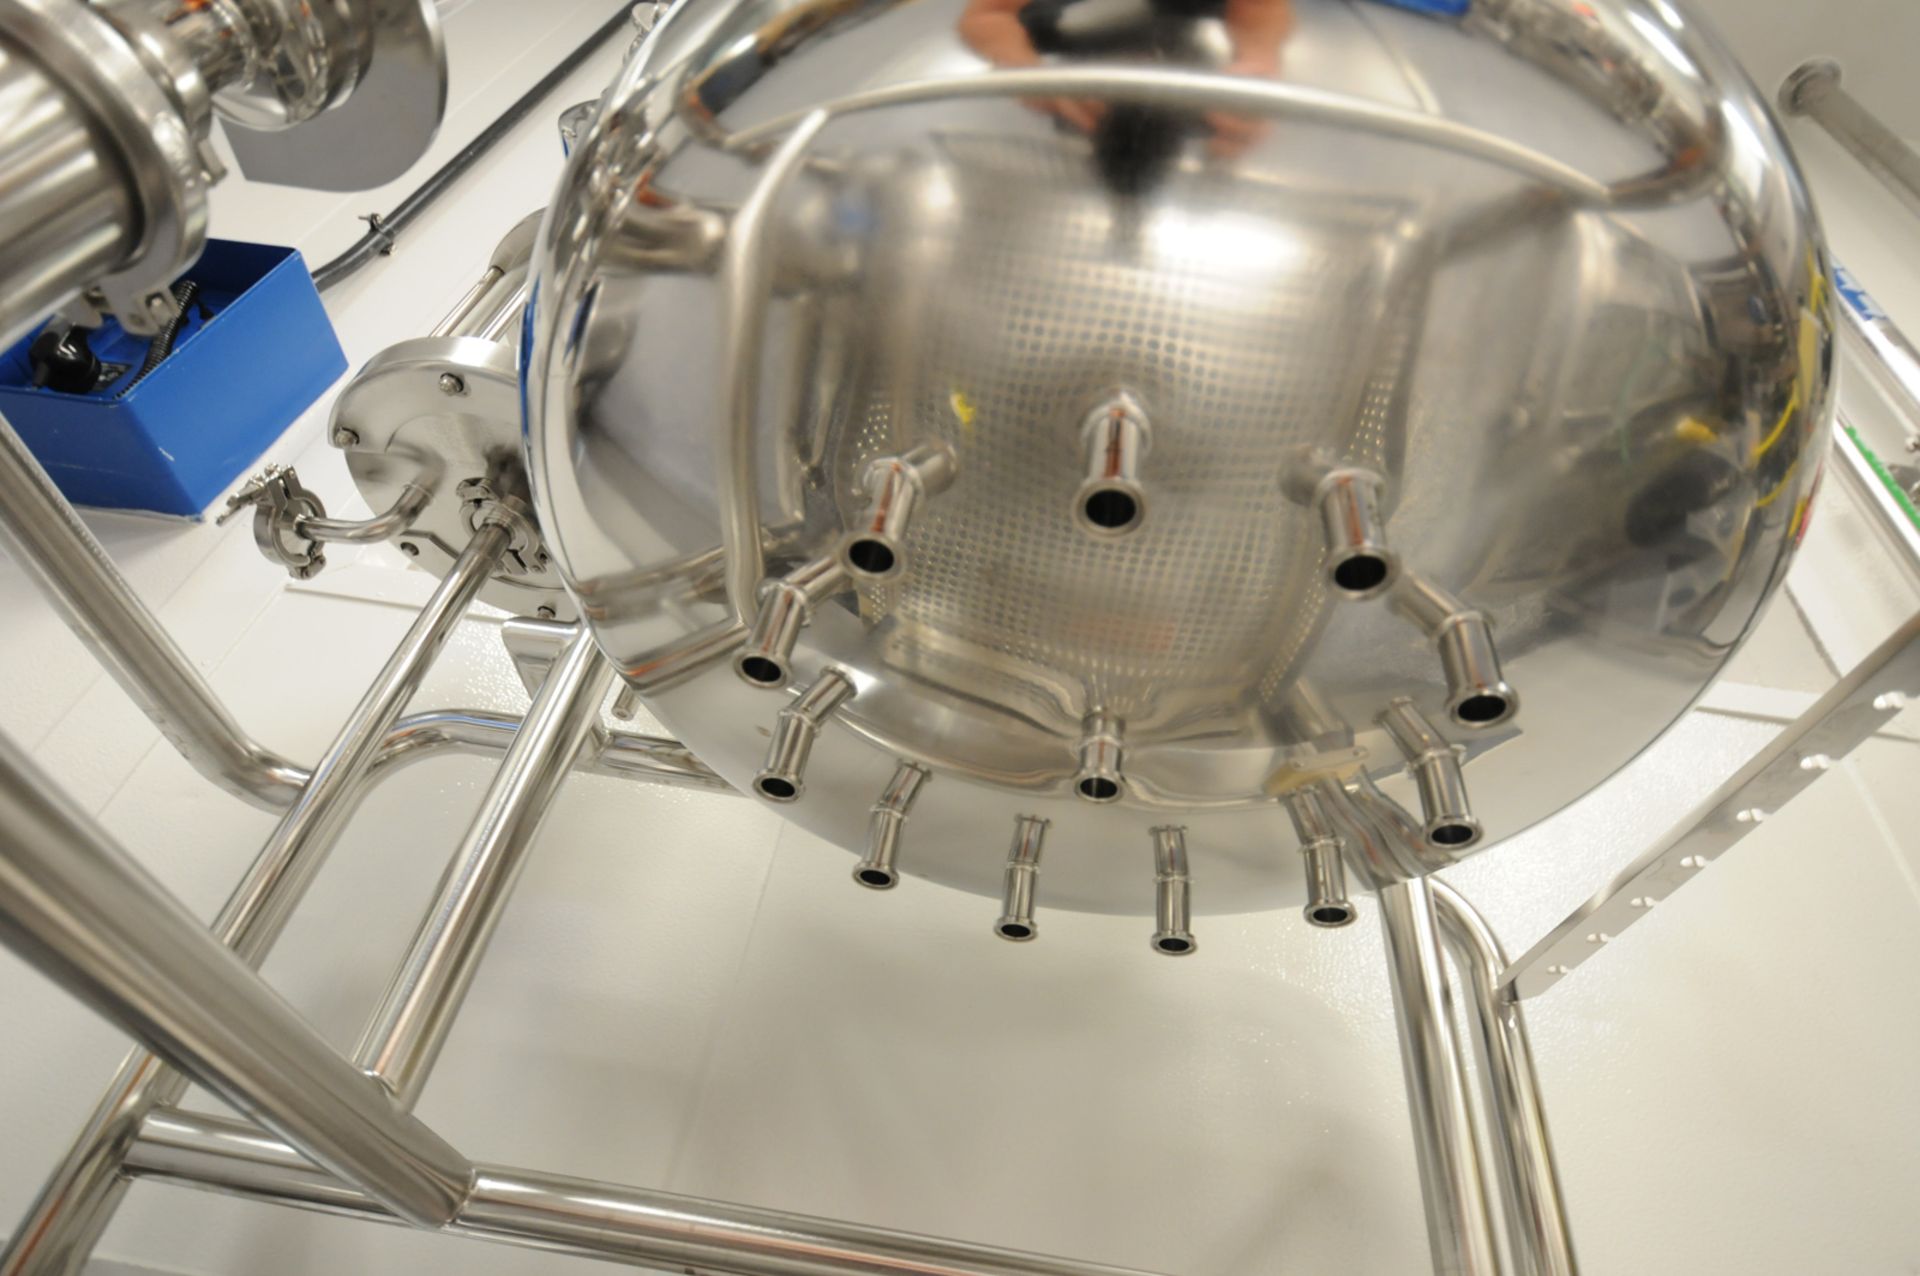 SOMMER & STRASSBURGER (2013) RAUM/CHAMBER STAINLESS STEEL CART MOUNTED PORTABLE REACTOR VESSEL - Image 5 of 6